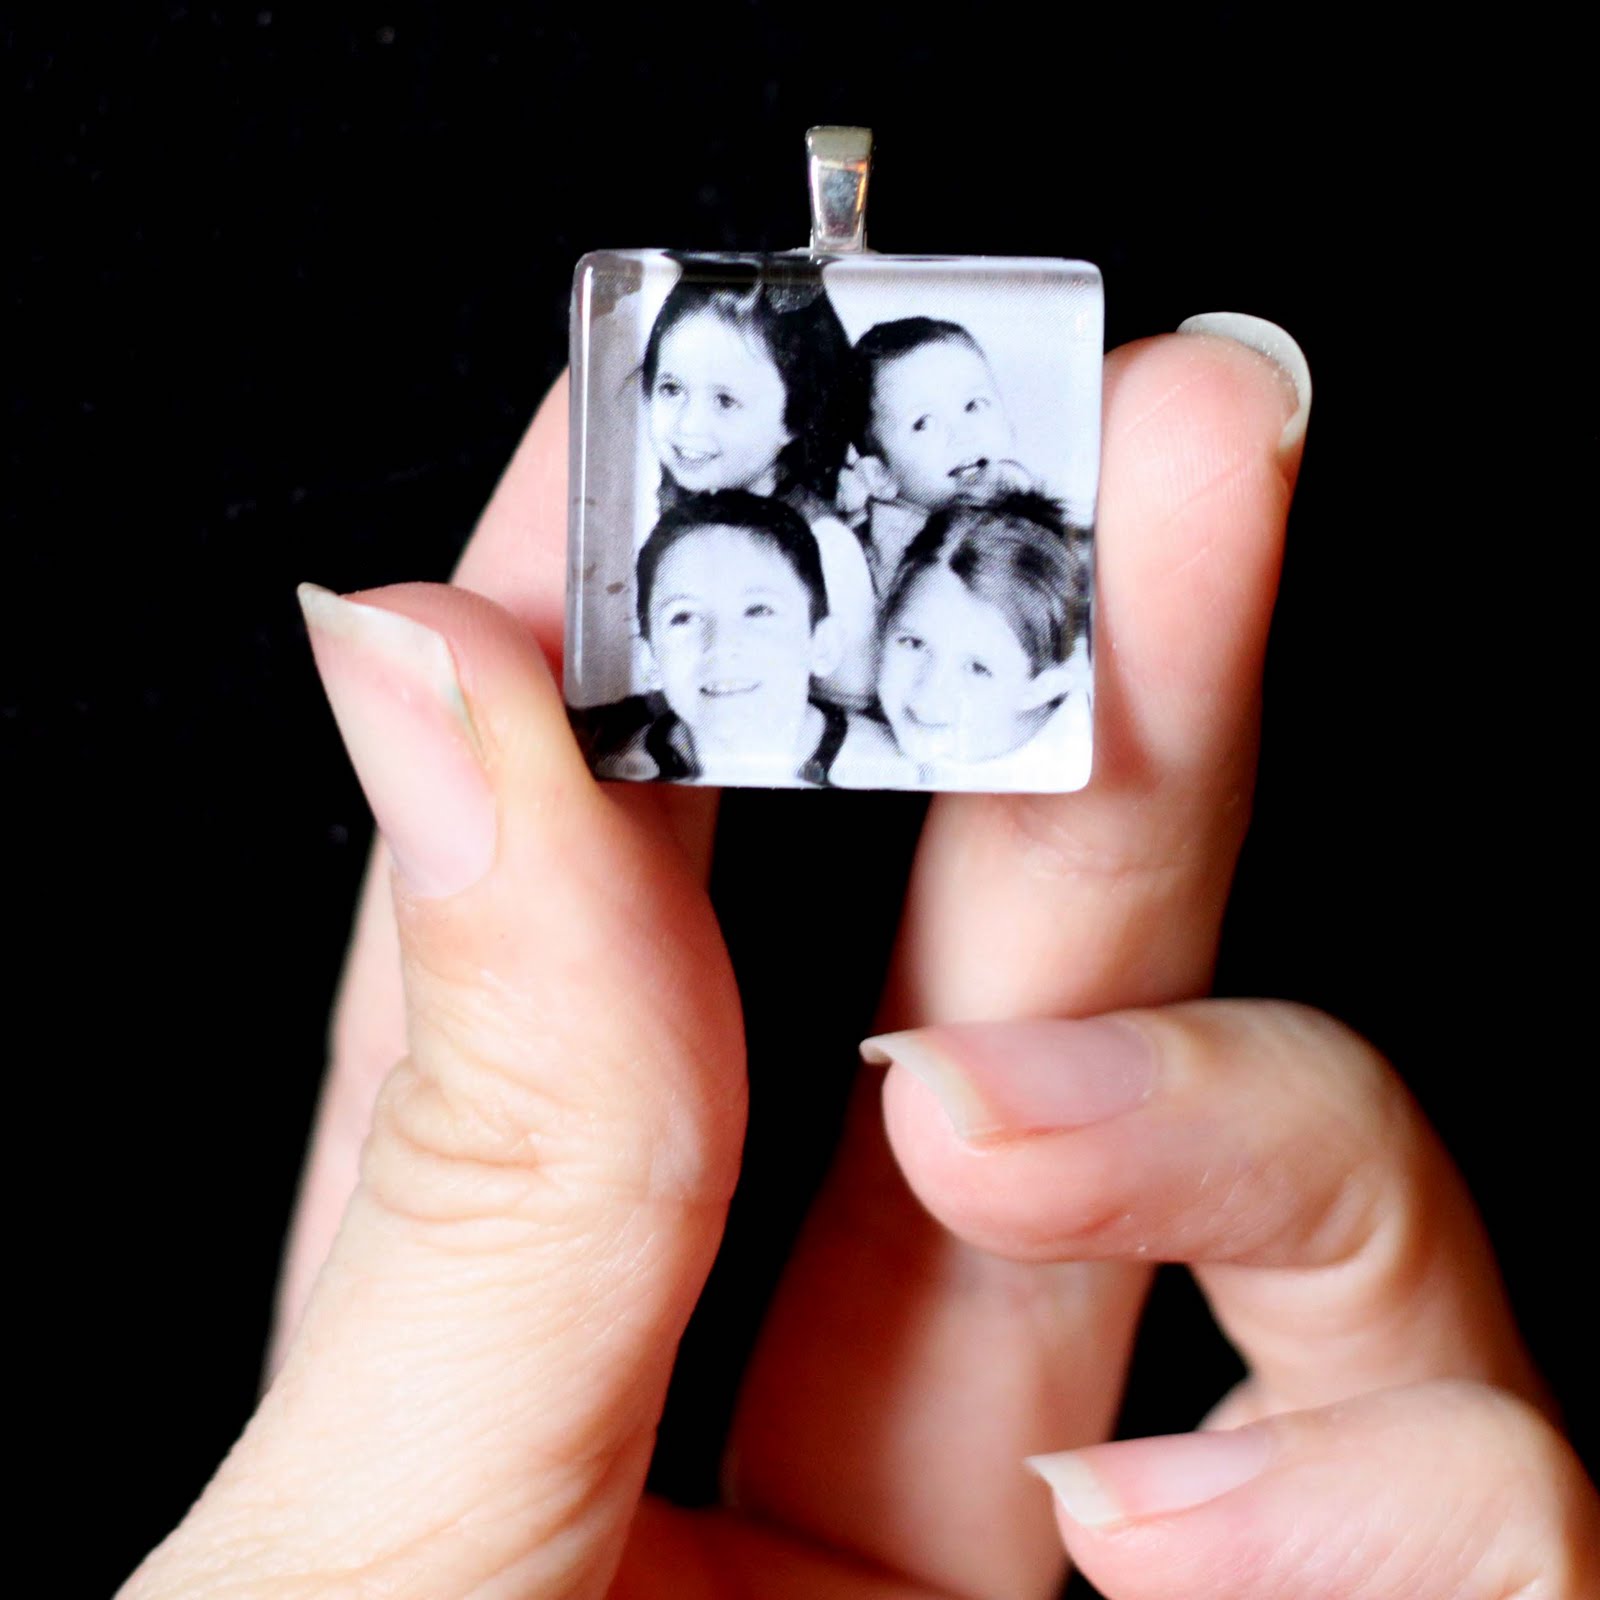 How to Make a Custom Homemade Picture / Photo Keychains